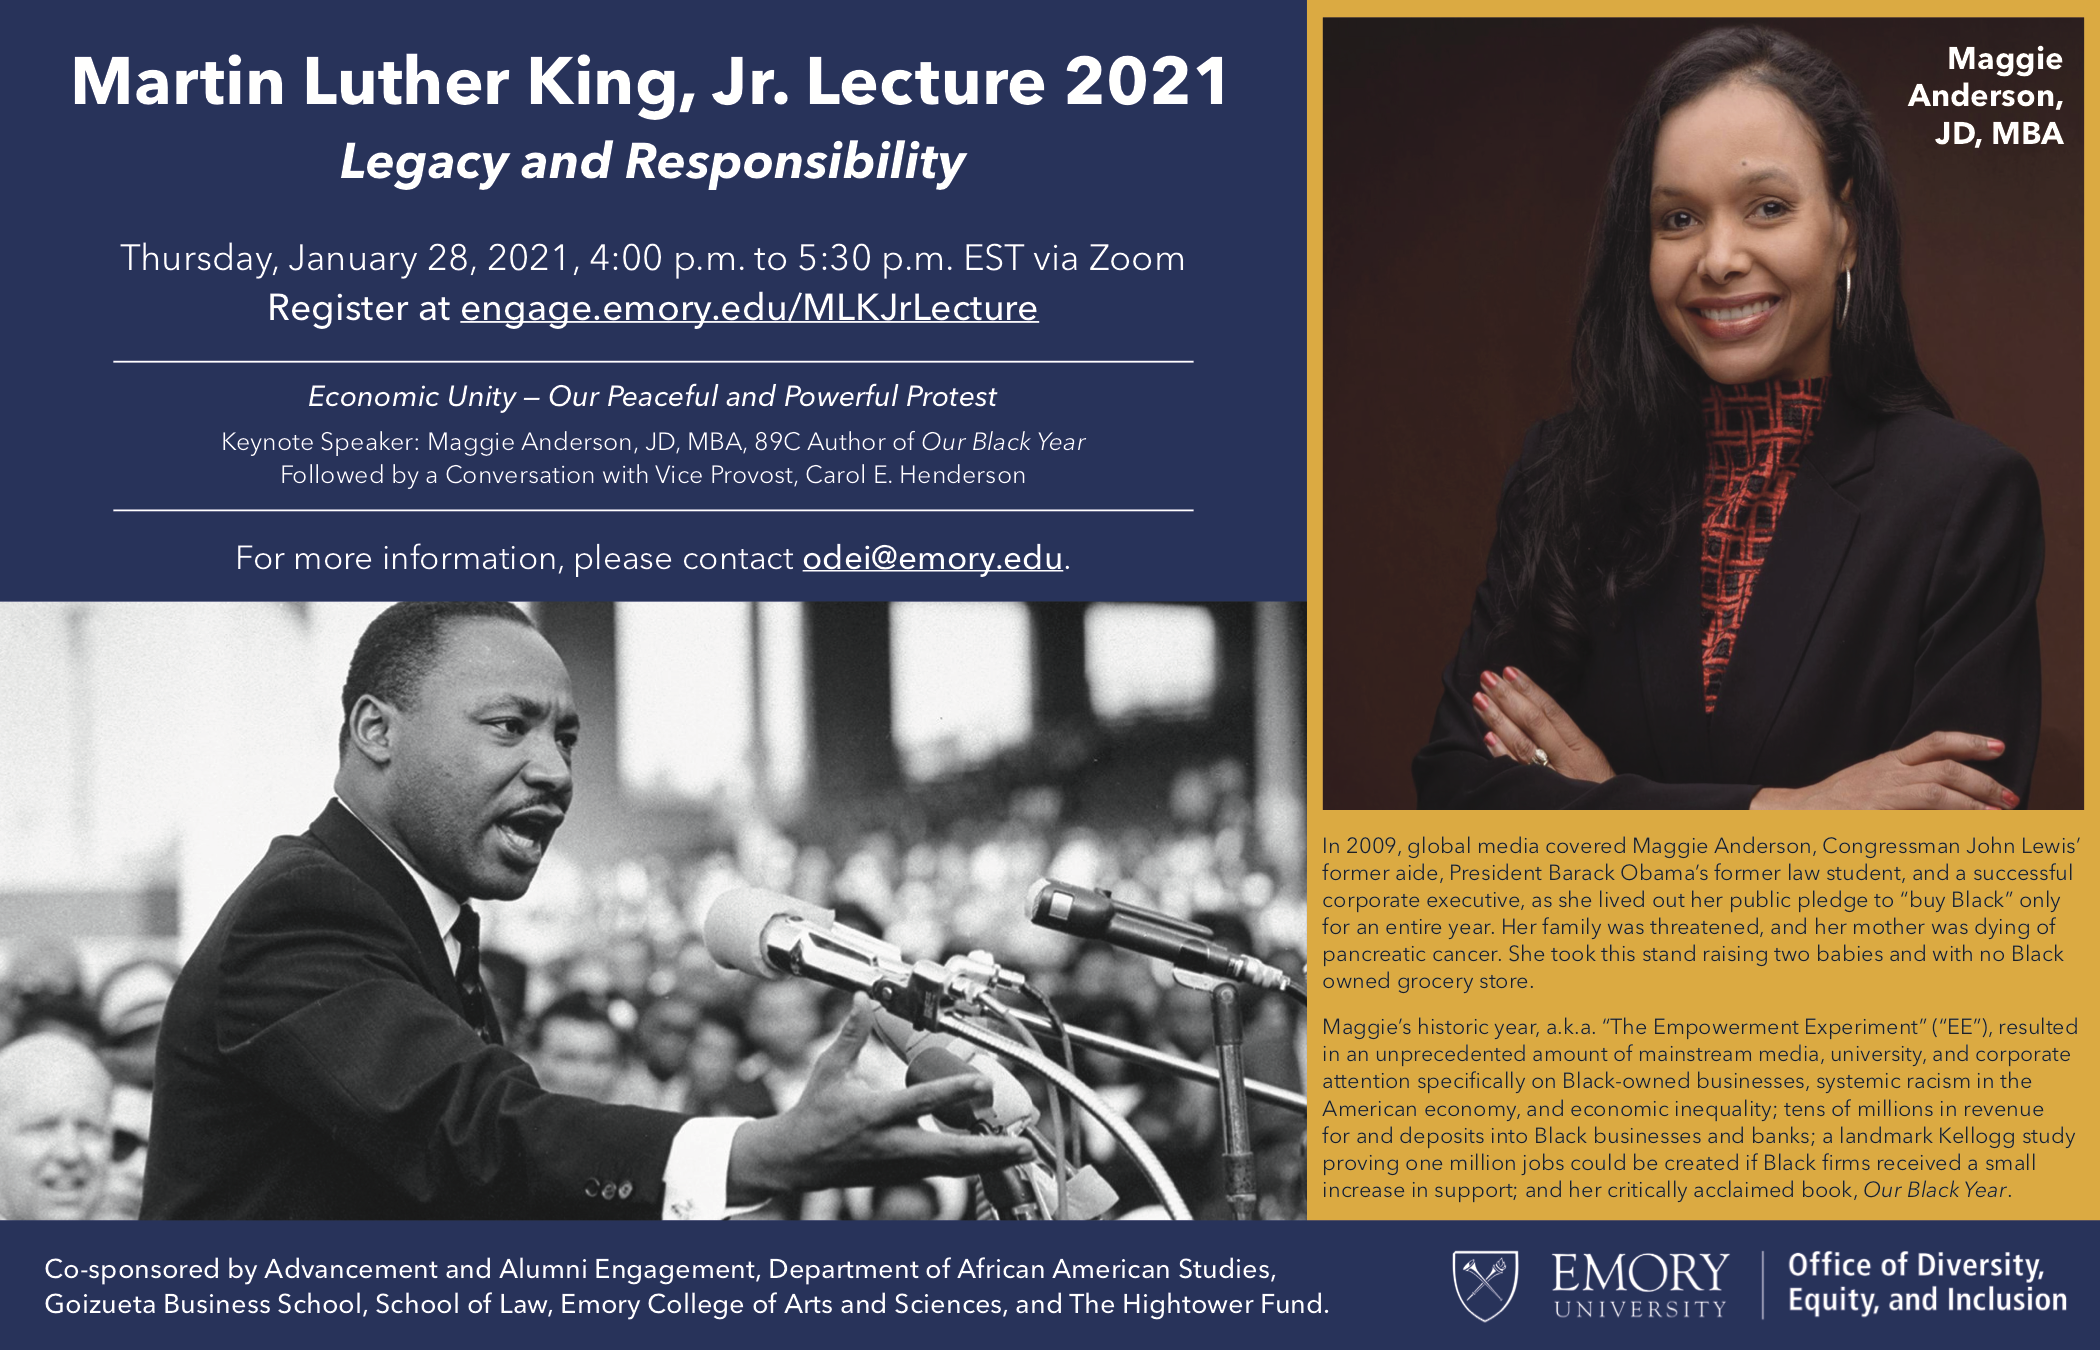 Flyer for the Martin Luther King Jr. Lecture 2021